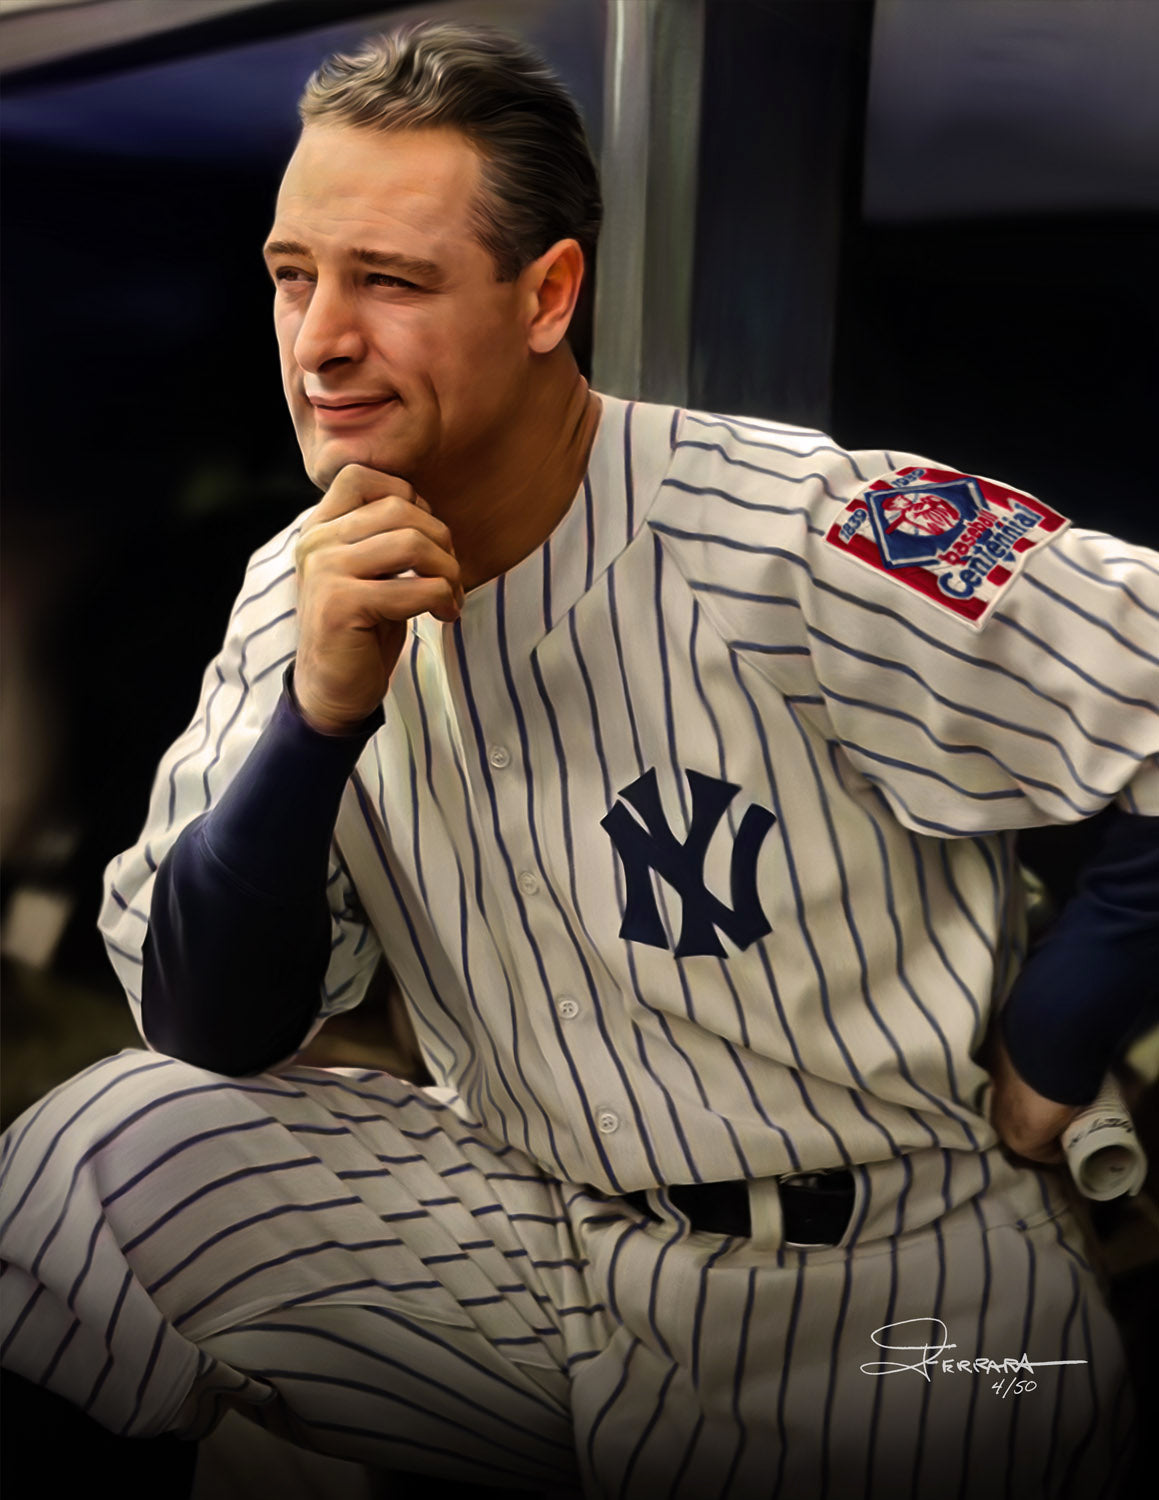 Lou Gehrig - Baseball's Iron Horse & The 1937 Campaign